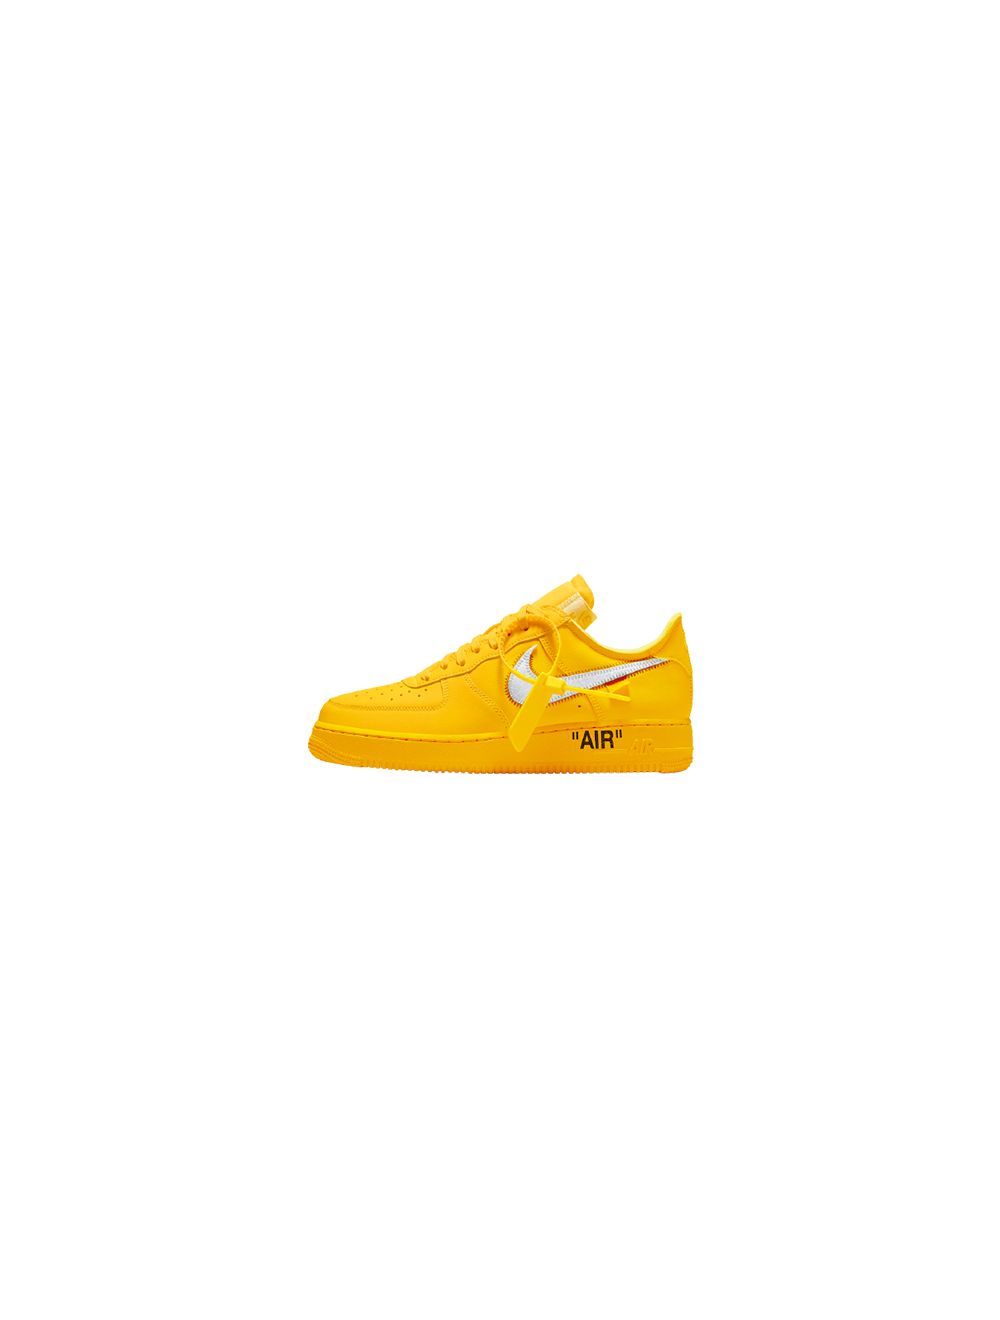 Nike Air Force 1 Low Off-White ICA University Gold Size 13M $1,300